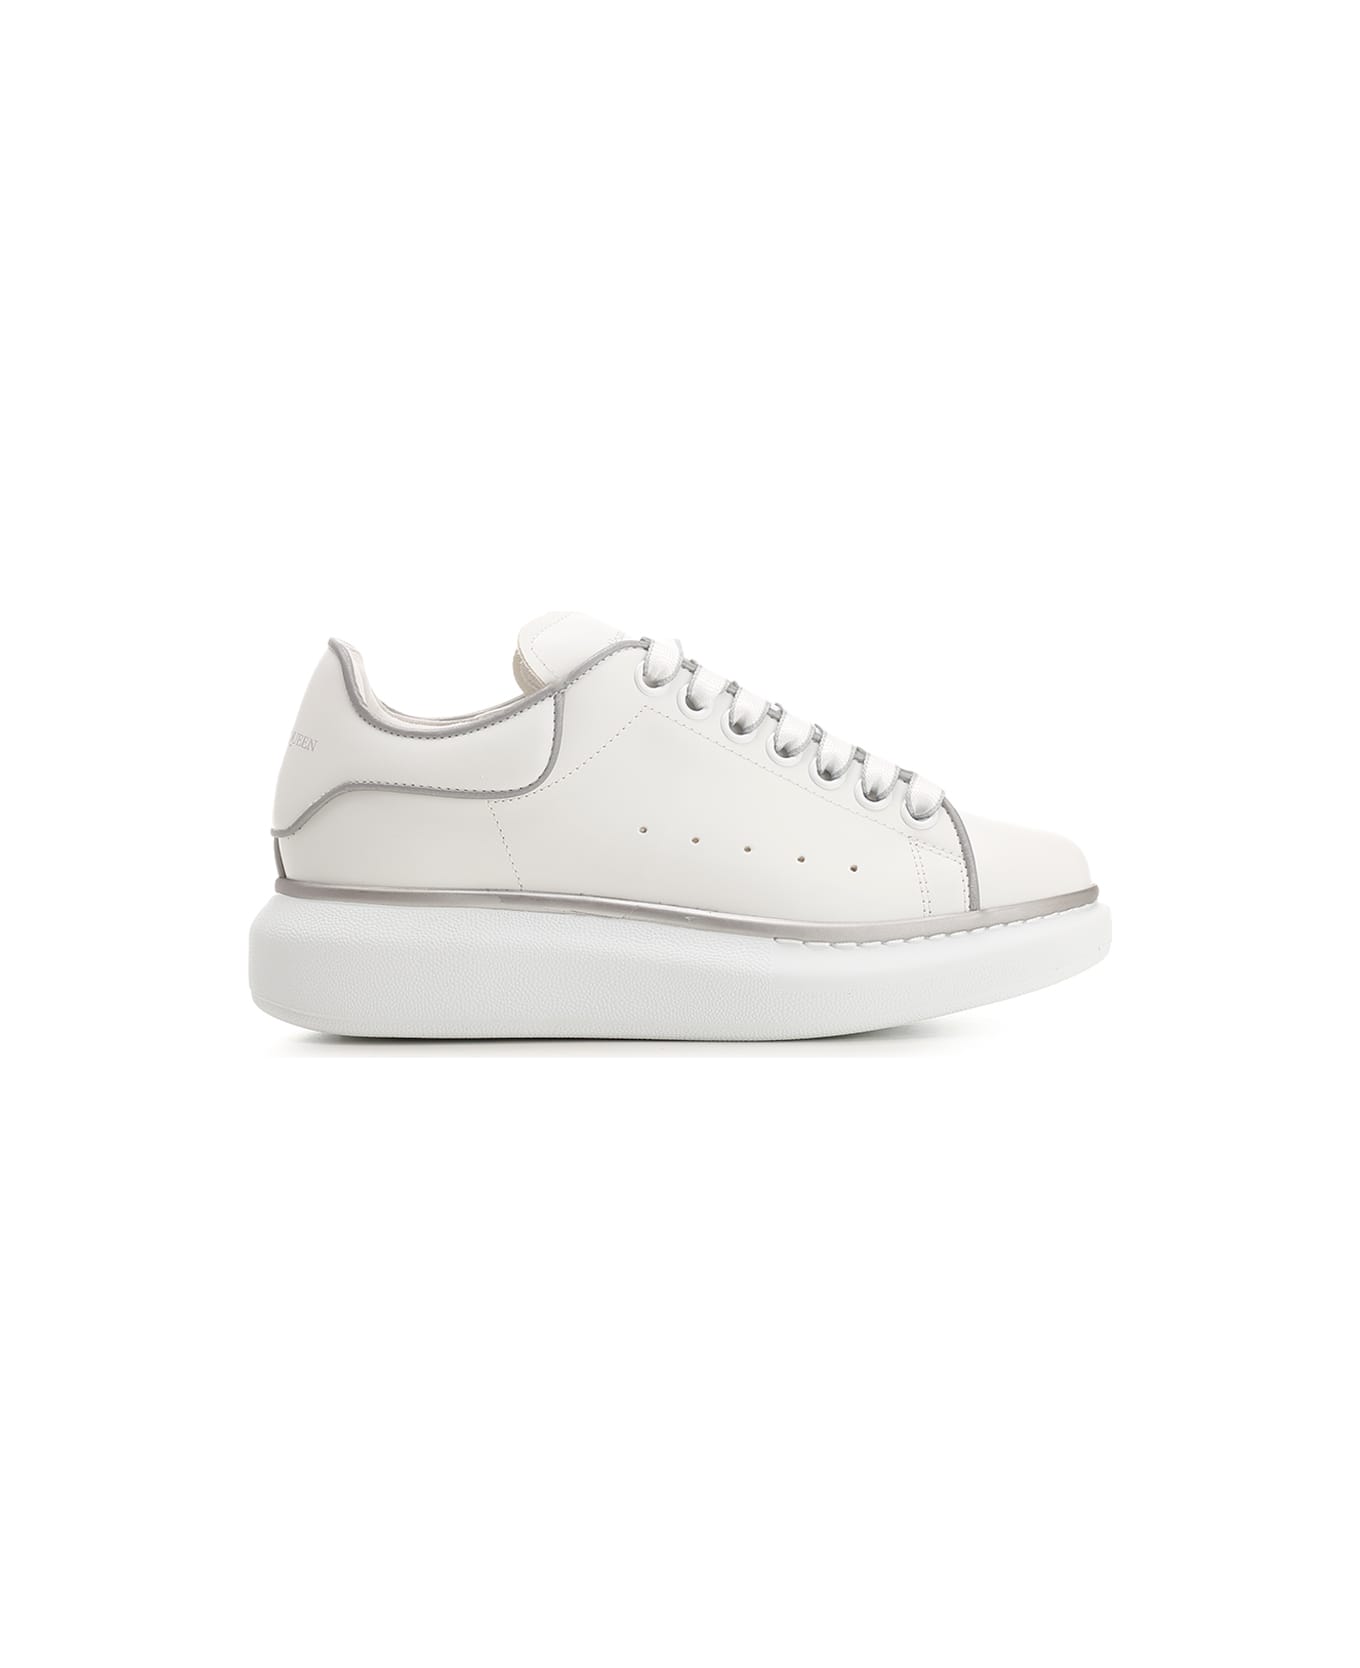 Alexander McQueen White Oversized Sneakers With Silver Piping - White スニーカー